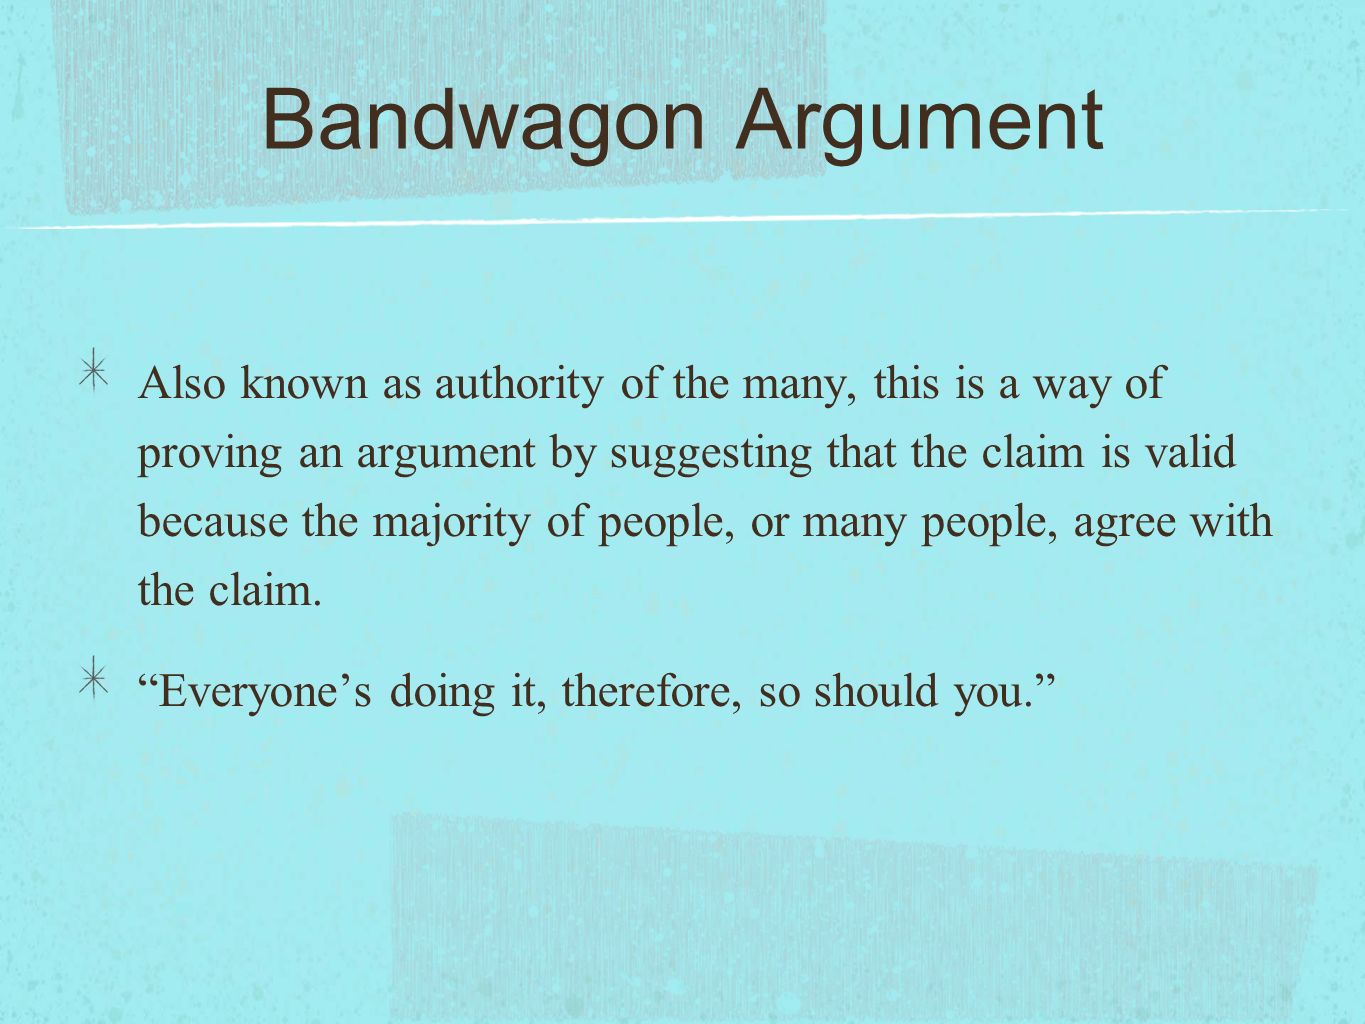 Bandwagon Argument Also known as authority of the many, this is a way of proving an argument by suggesting that the claim is valid because the majority of people, or many people, agree with the claim.